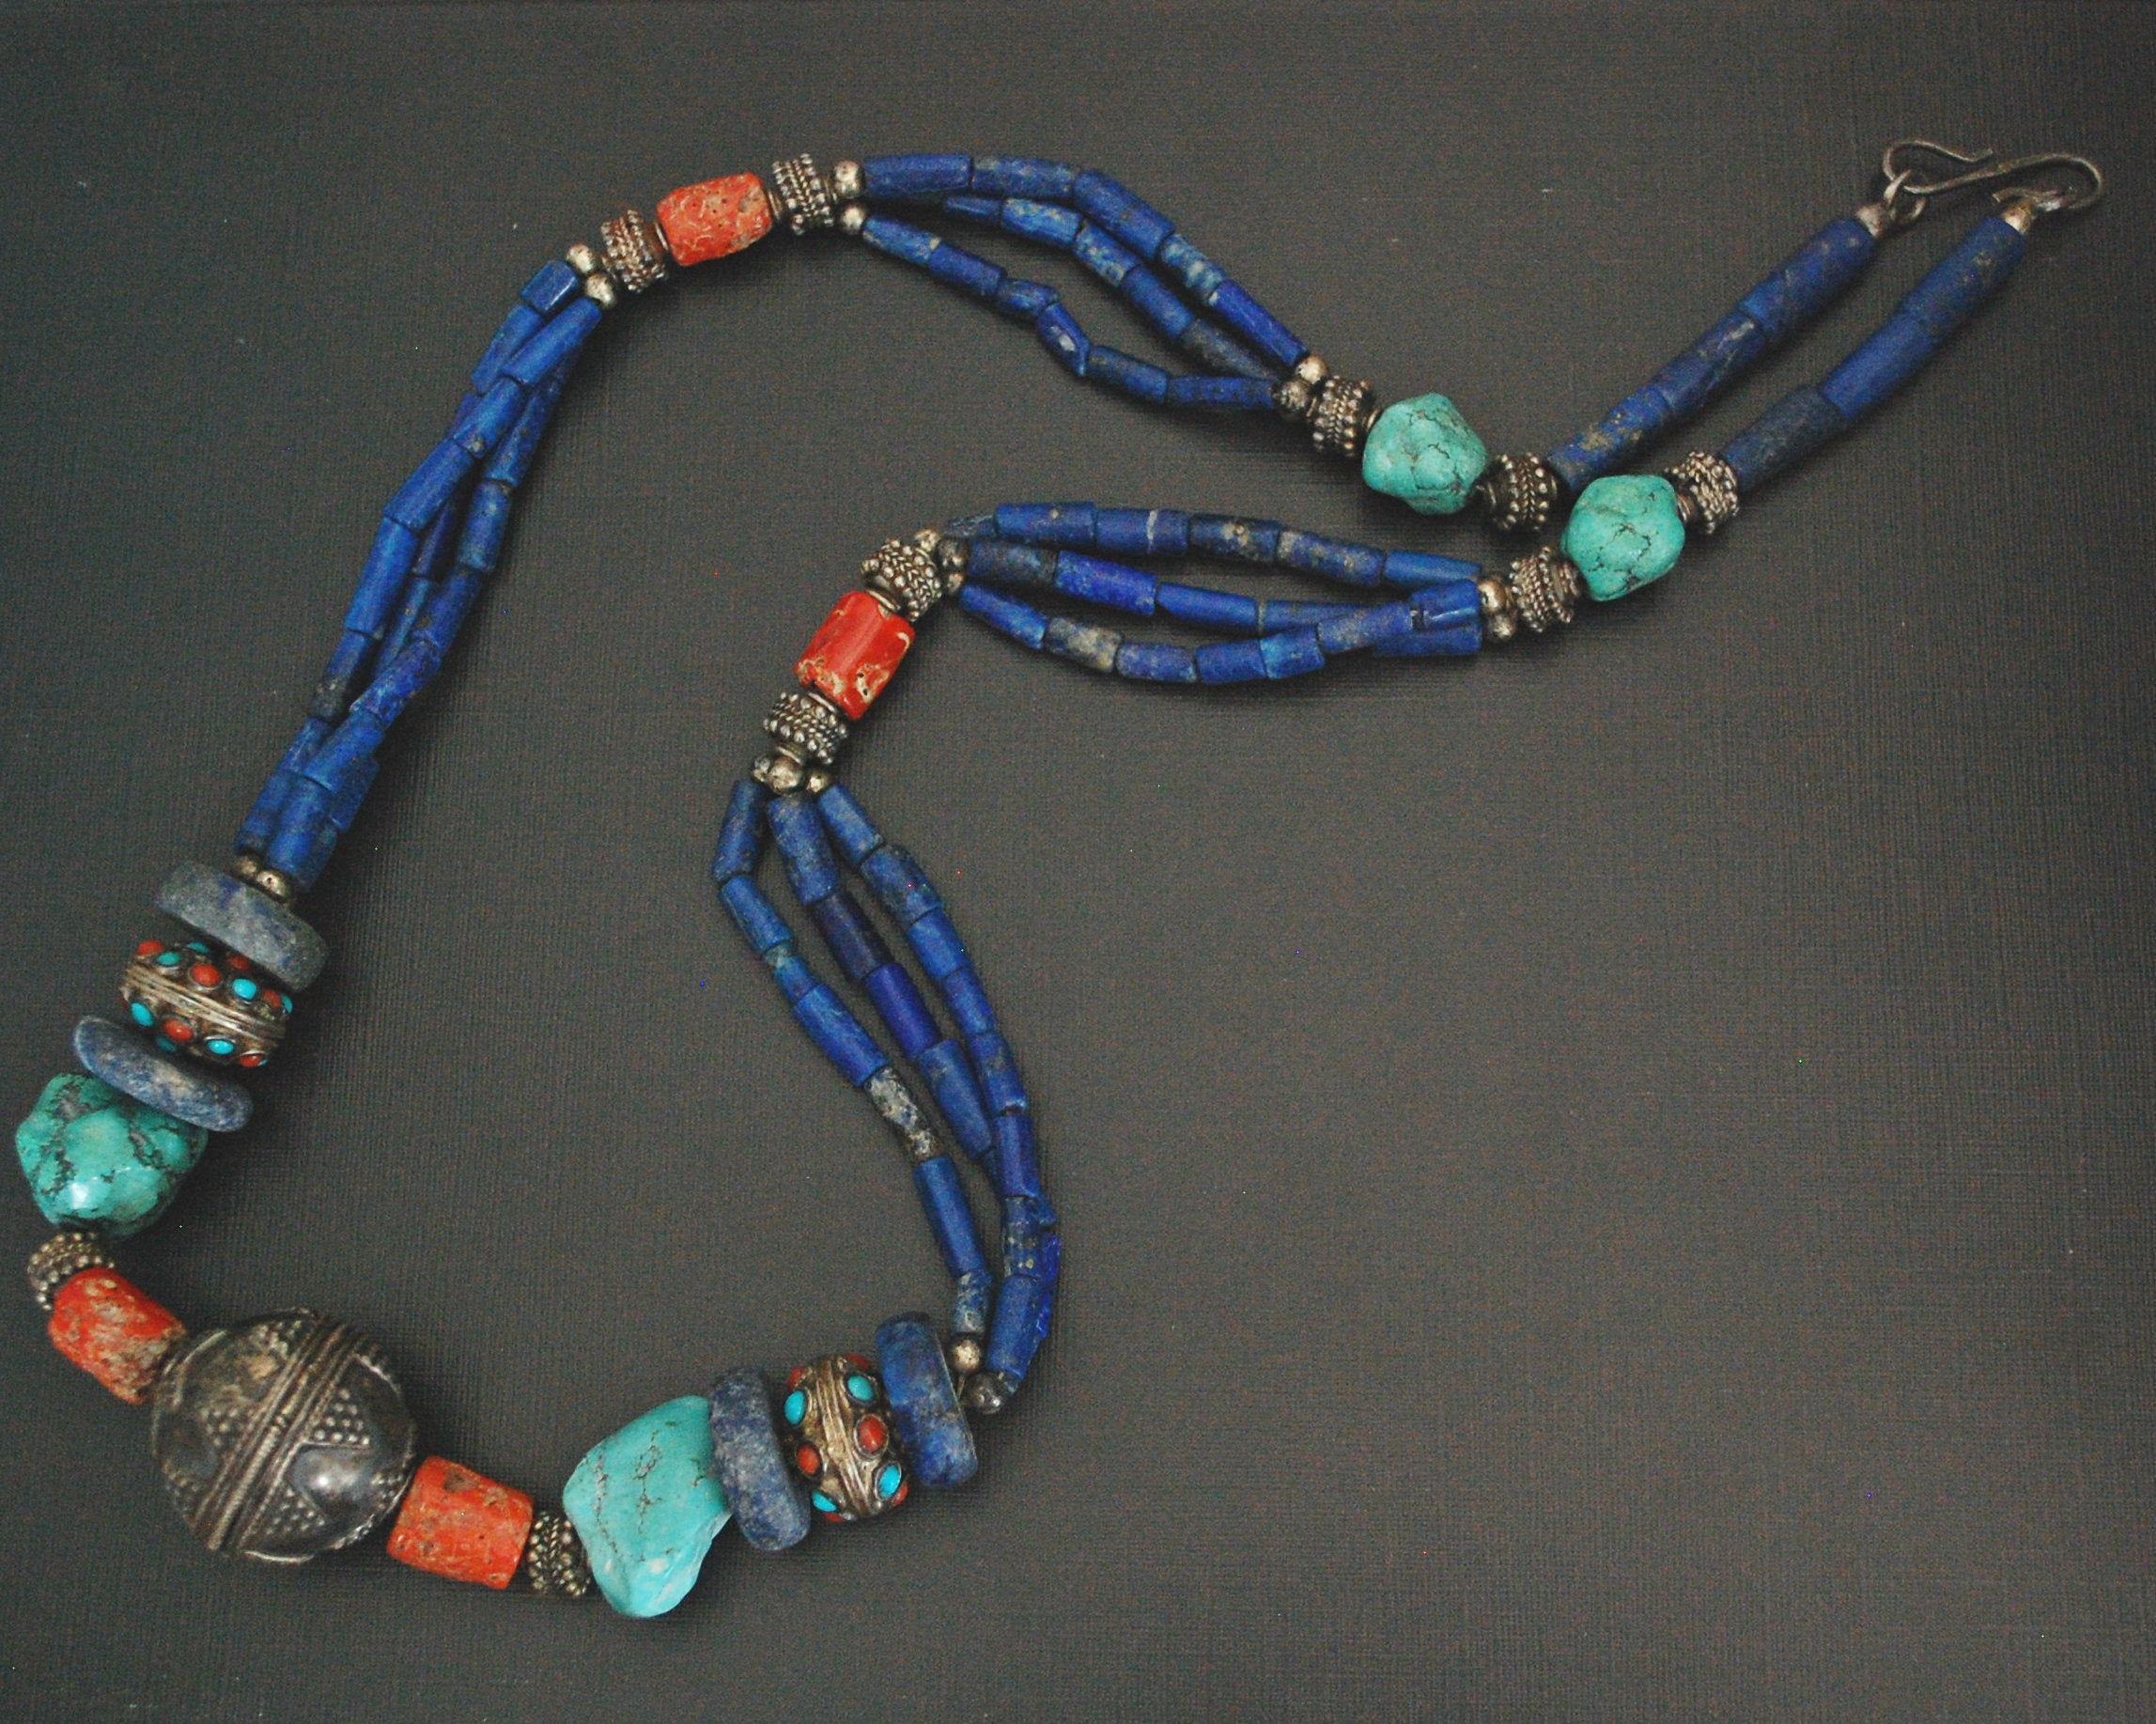 Long Coral, Lapis Lazuli and Turquoise Necklace from India